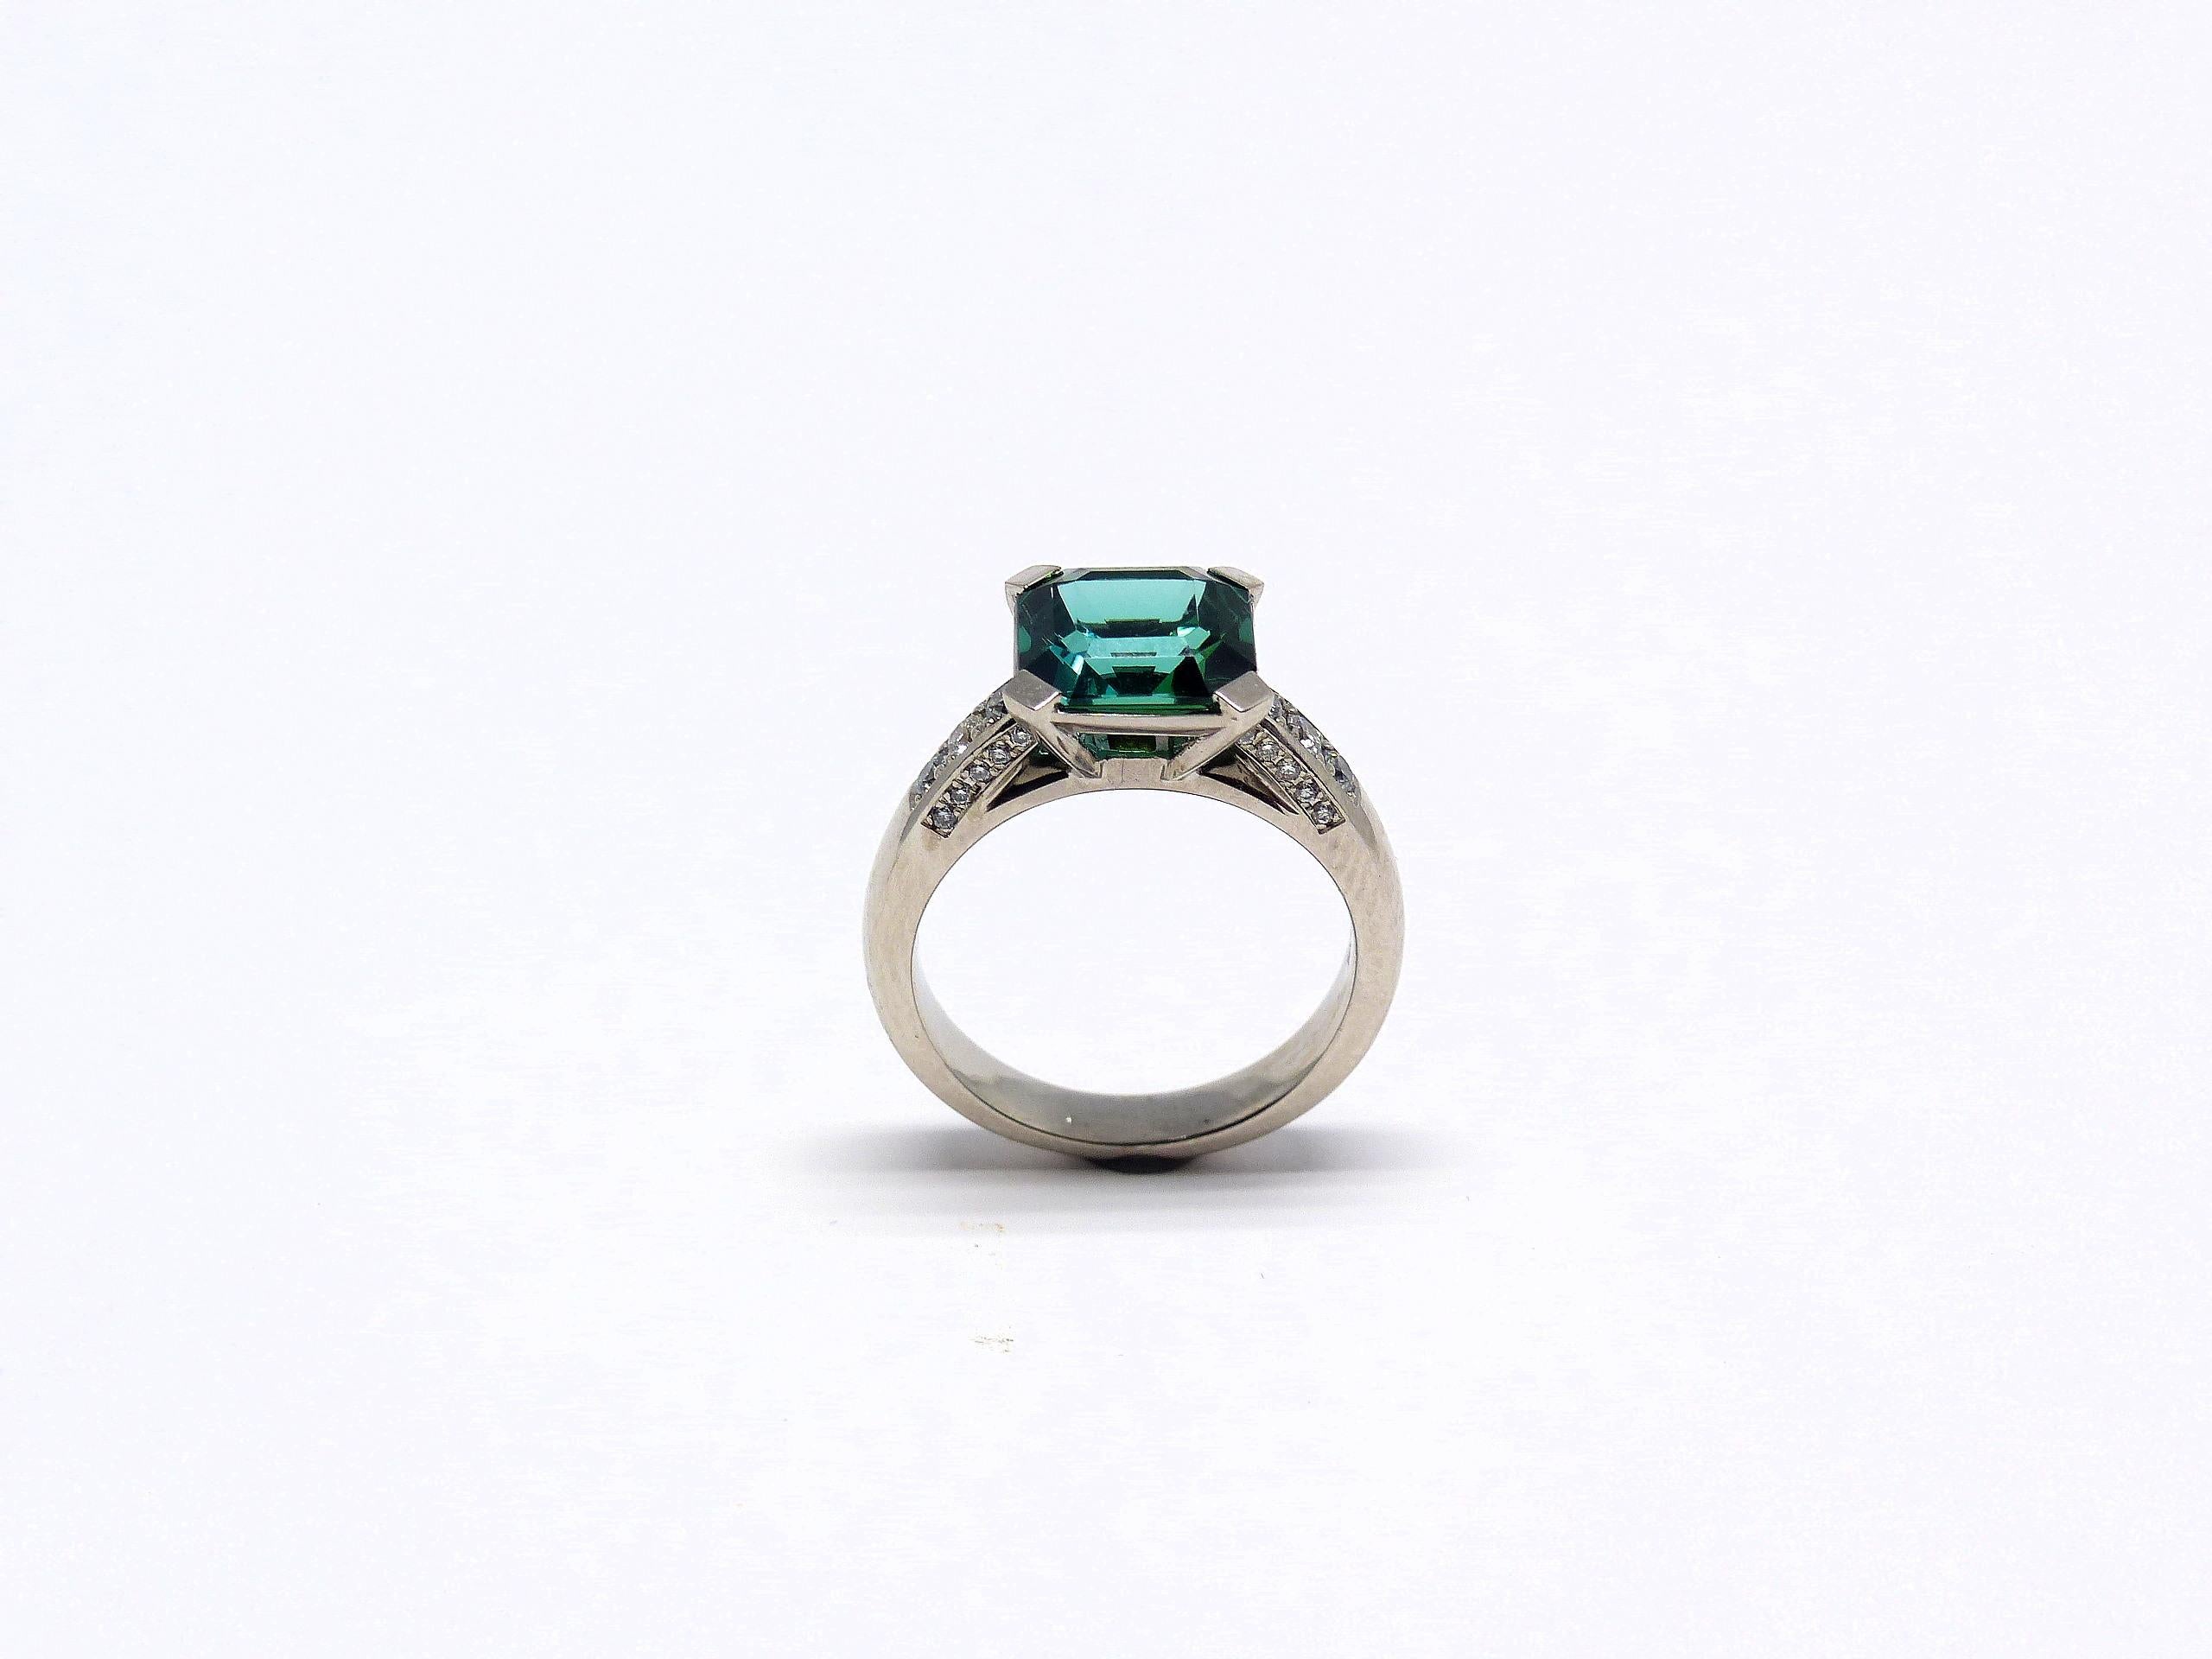 Thomas Leyser is renowned for his contemporary jewellery designs utilizing fine gemstones. 

This 18k white gold (8.30g) ring is set with 1x fine intense green-blue Tourmaline (facetted, 9x9mm, 3.20ct) + 26x Diamonds (brilliant-cut,G/VS, 0.32ct).